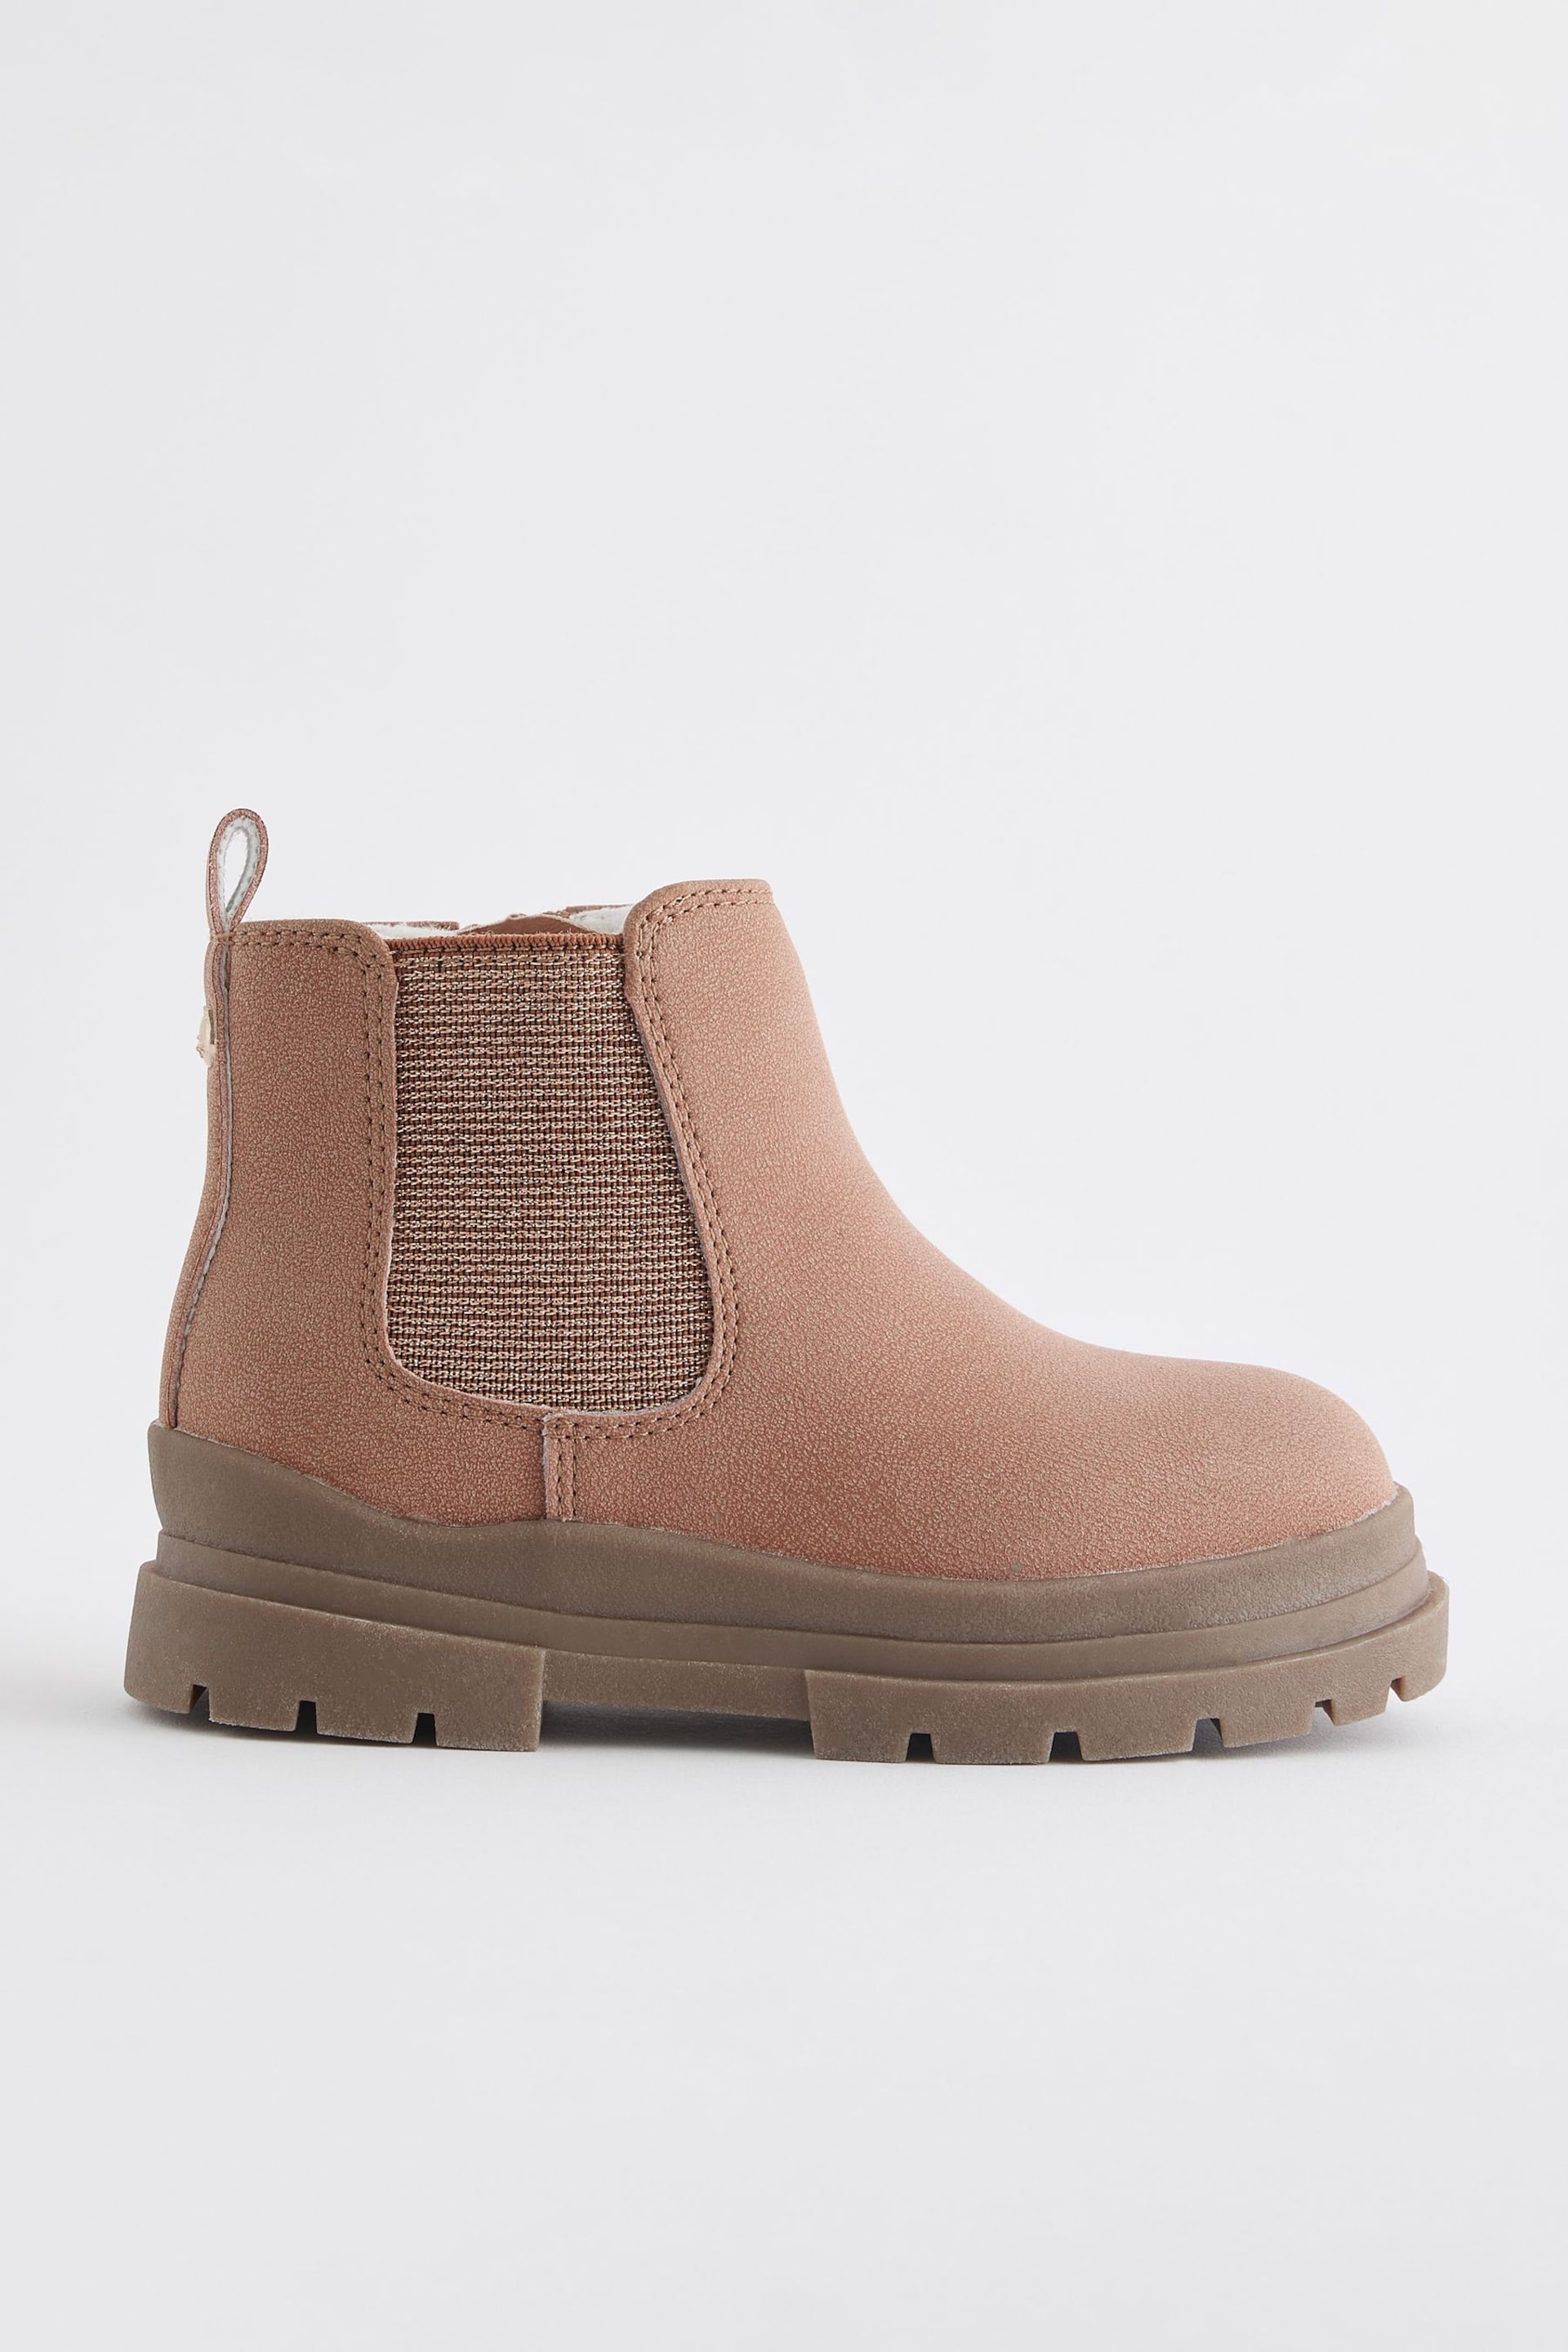 Pink Tan Chelsea Chunky Boots - Image 2 of 8